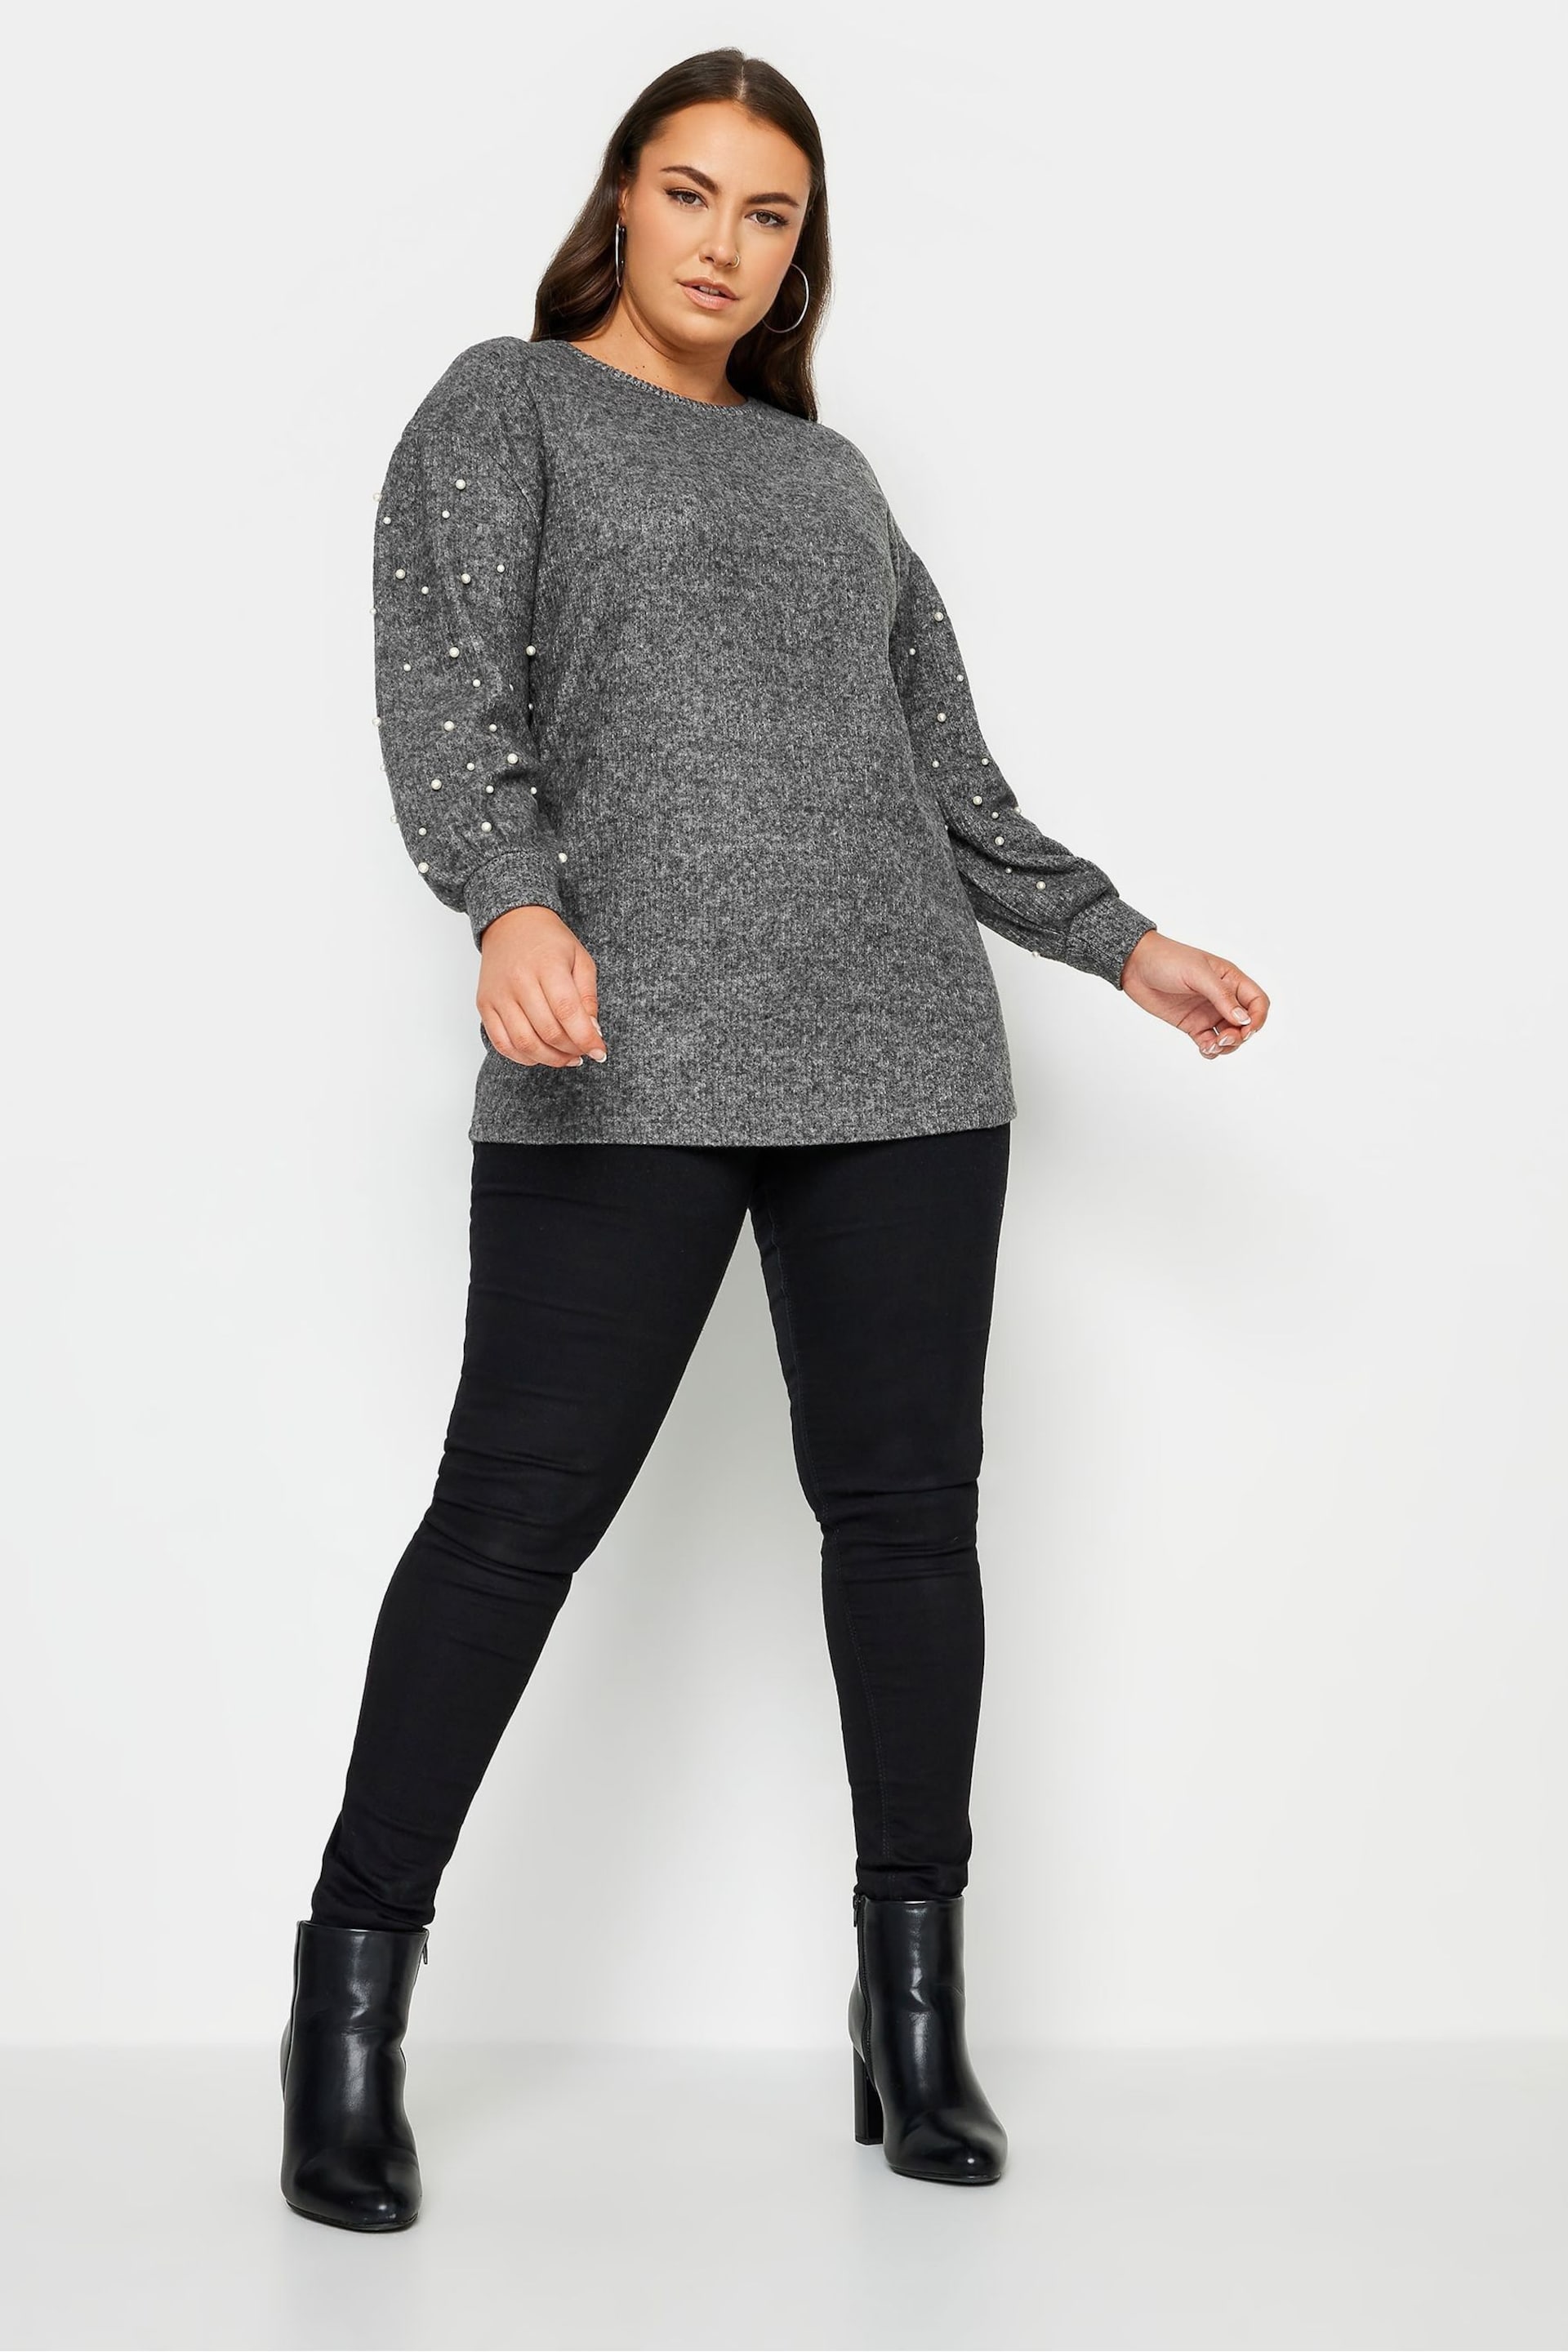 Yours Curve Grey Soft Touch Pearl Embellished Sweatshirt - Image 3 of 5